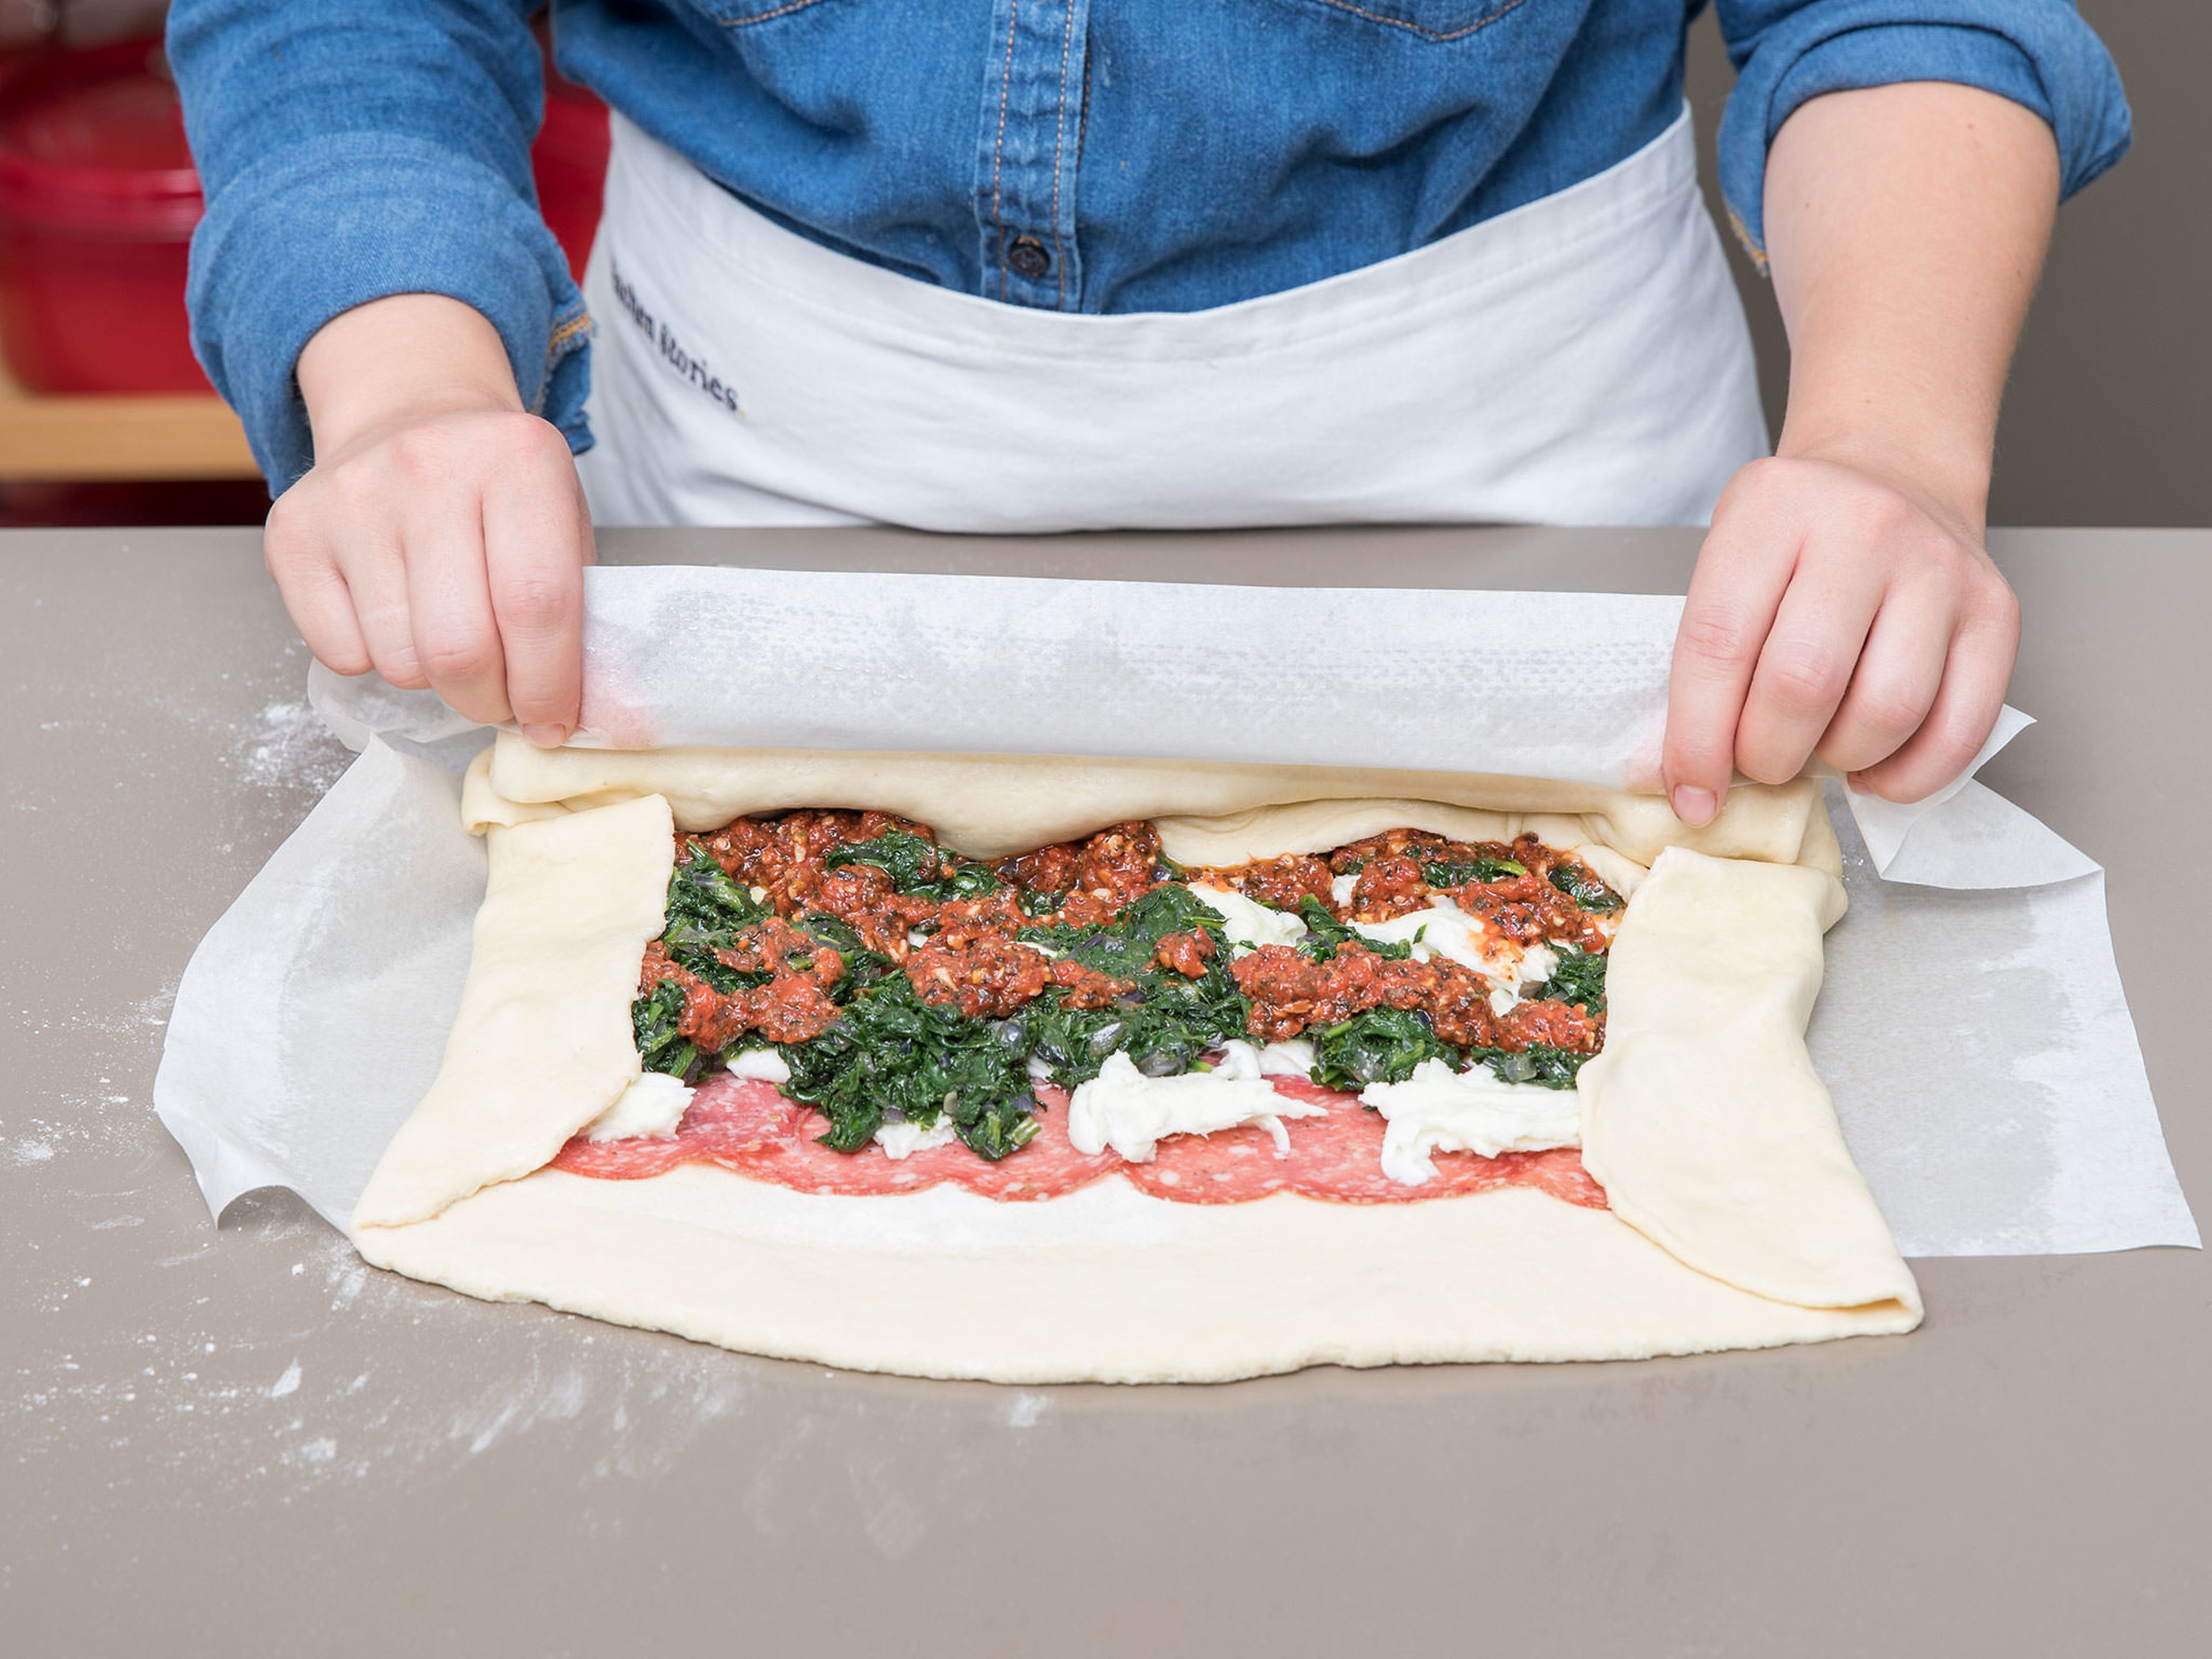 Preheat oven to 180°C/350°F. Brush a sheet of parchment paper with some olive oil. Flour a working surface and roll dough out into a rectangle. Transfer the dough onto the parchment paper. Layer on slices of fennel salami, followed by the prosciutto, leaving approx. a 3-cm/1-in border around the edge. Tear mozzarella and place on top, spoon on the cooked spinach, followed by the tomato sauce. Pick up the the  side of the parchment paper closest to you, lift it up and fold over, rolling the dough into a tight log. Pinch along the seam and tuck in the ends.